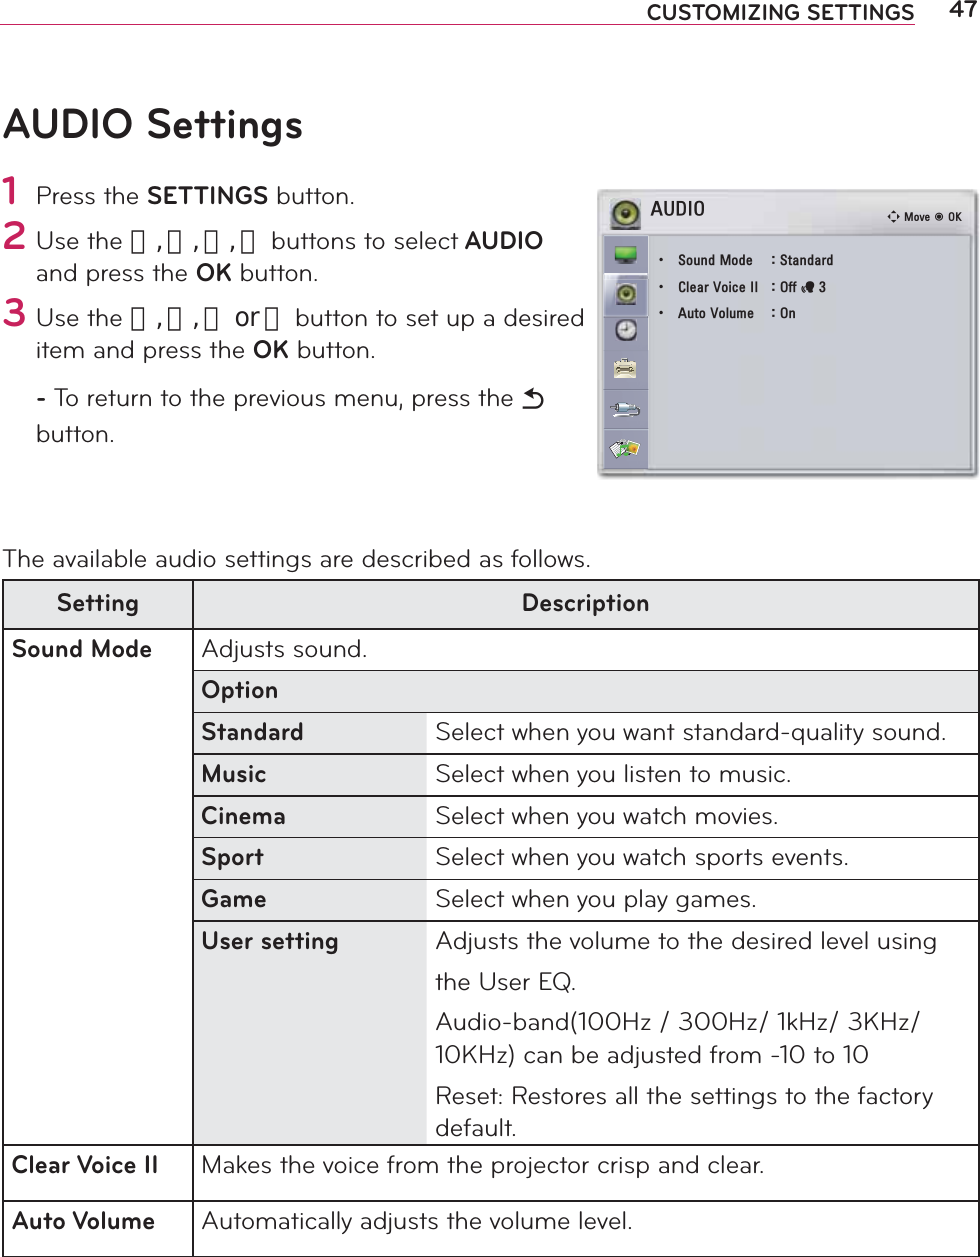 47CUSTOMIZING SETTINGSAUDIO Settings1 Press the SETTINGS button.2 Use the 󱛨, 󱛩, 󱛦, 󱛧 buttons to select AUDIO and press the OK button.3 Use the 󱛨, 󱛩, 󱛦 or 󱛧 button to set up a desired item and press the OK button.- To return to the previous menu, press the ᰳ button.The available audio settings are described as follows.Setting DescriptionSound Mode Adjusts sound.OptionStandard Select when you want standard-quality sound.Music Select when you listen to music.Cinema Select when you watch movies.Sport Select when you watch sports events.Game Select when you play games.User setting Adjusts the volume to the desired level usingthe User EQ.Audio-band(100Hz / 300Hz/ 1kHz/ 3KHz/ 10KHz) can be adjusted from -10 to 10Reset: Restores all the settings to the factory default.Clear Voice II Makes the voice from the projector crisp and clear.Auto Volume Automatically adjusts the volume level.$8&apos;,2 ᯒ0RYHᯙ2.ؒ 6RXQG0RGH 6WDQGDUGؒ &amp;OHDU9RLFH,, 2IIᰕؒ $XWR9ROXPH 2Q